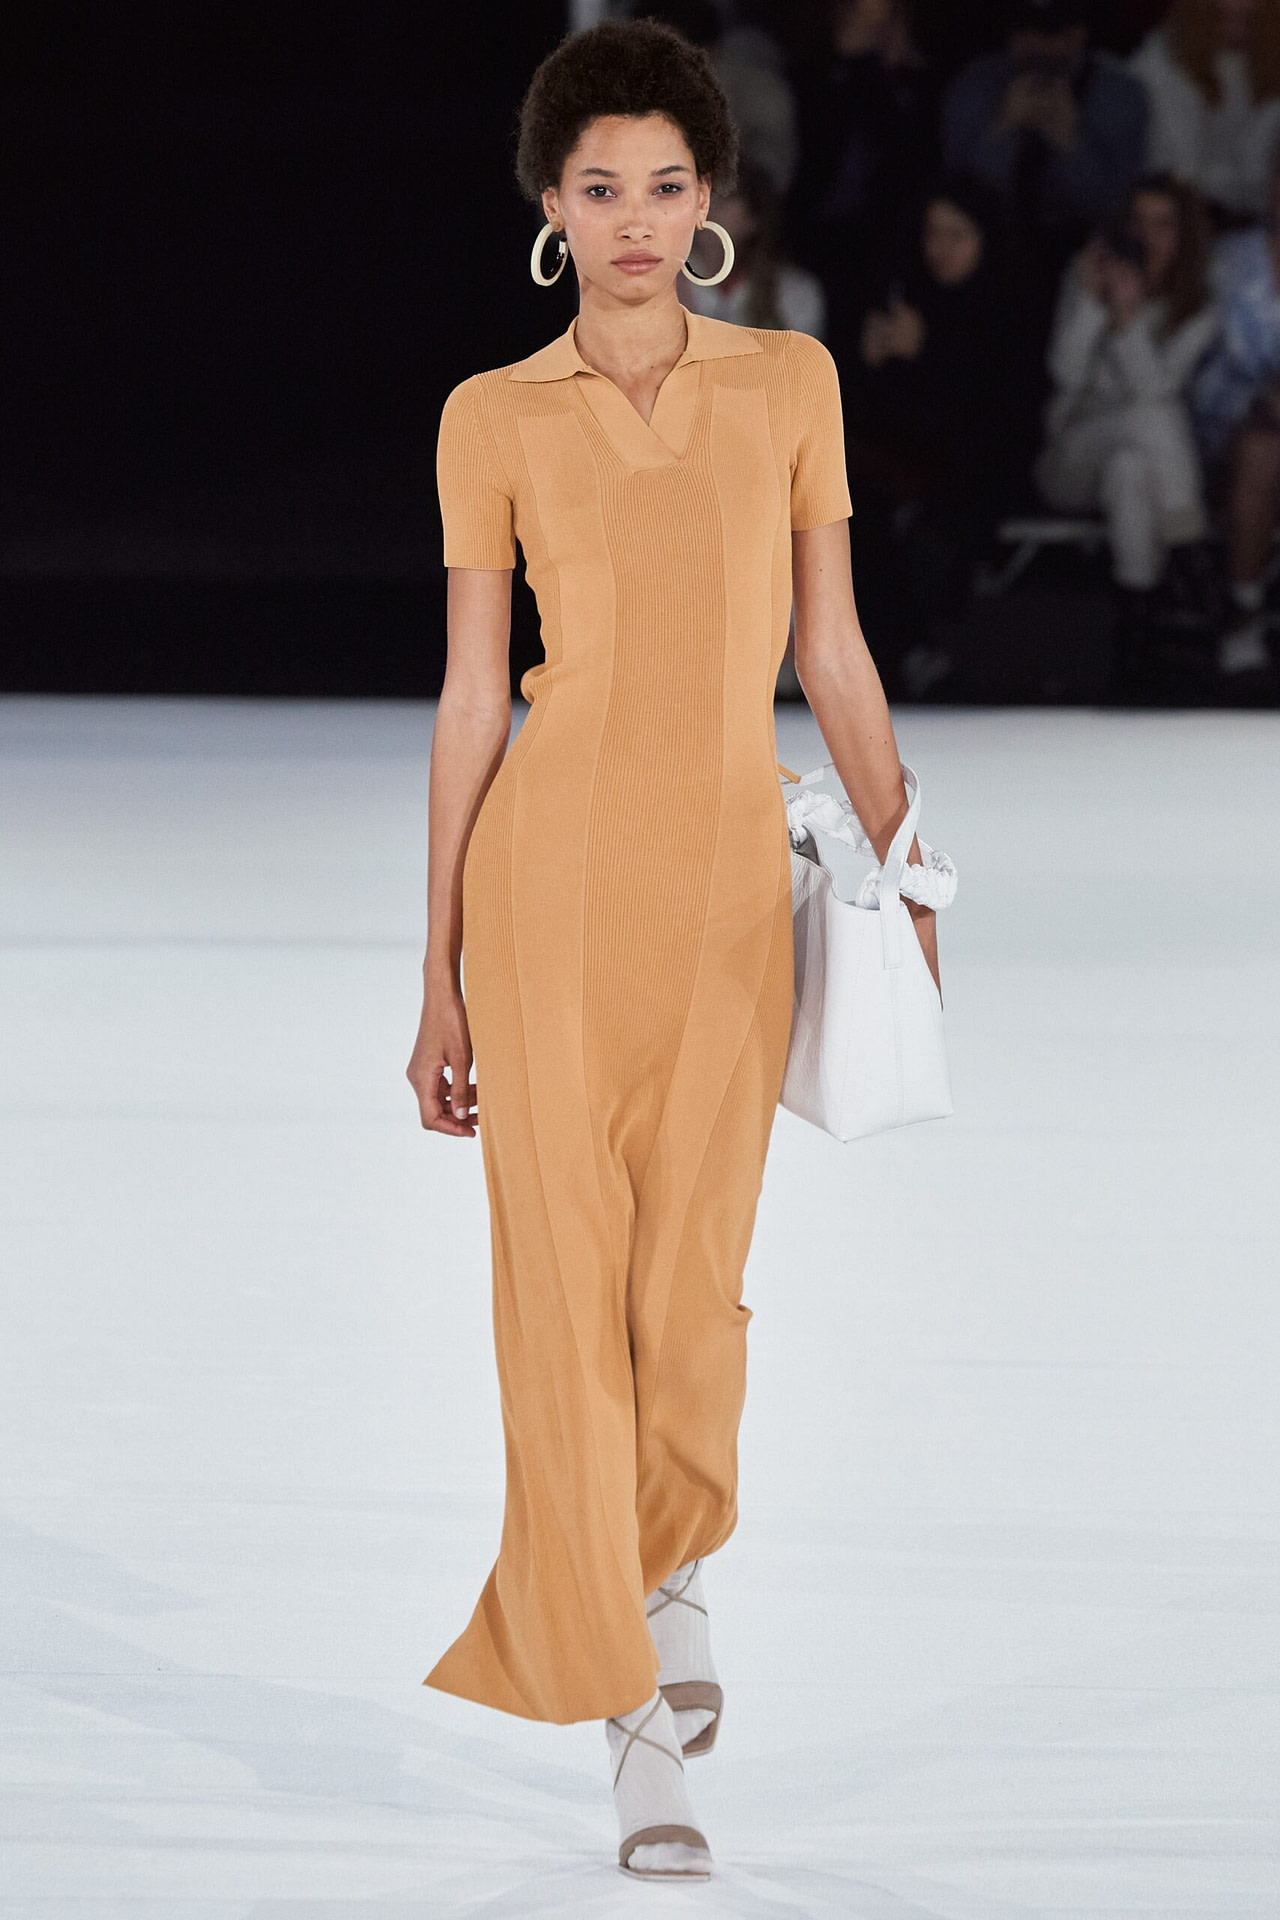 Jacquemus Fall 2020 ready-to-wear